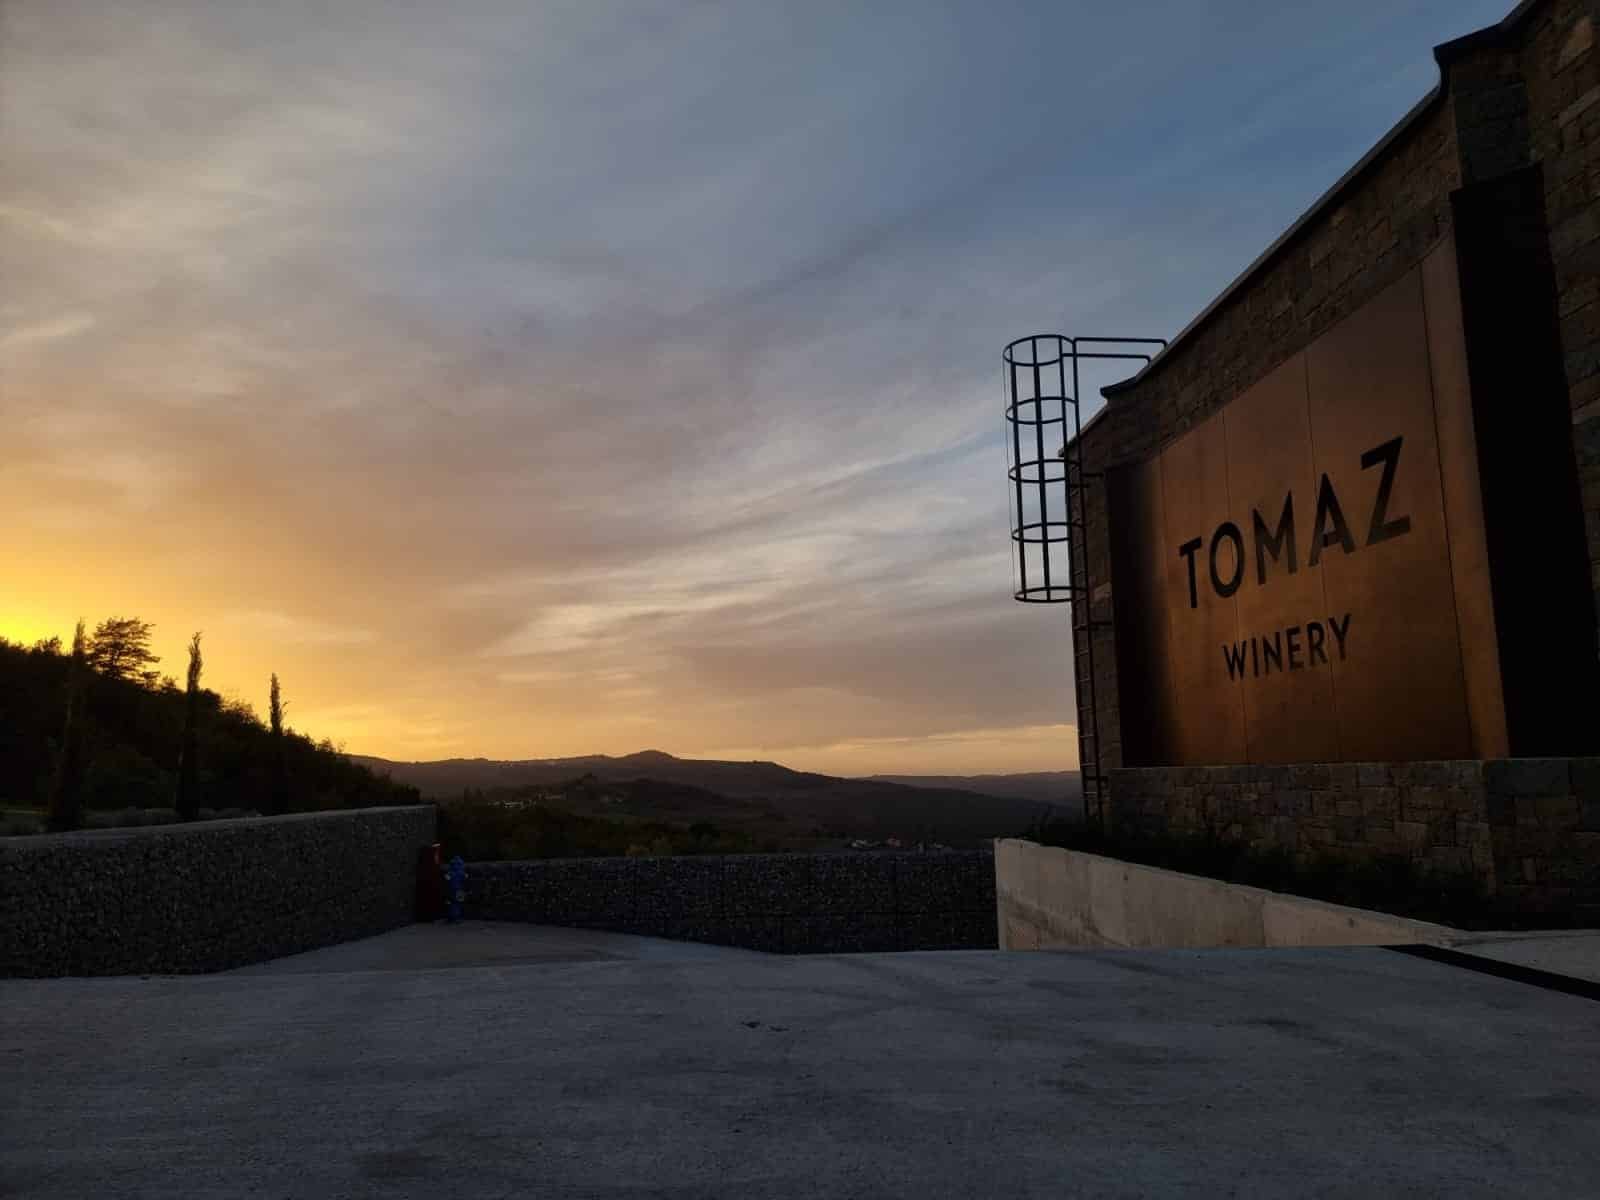 The sign for Tomaz Winery in Istria at sunset.